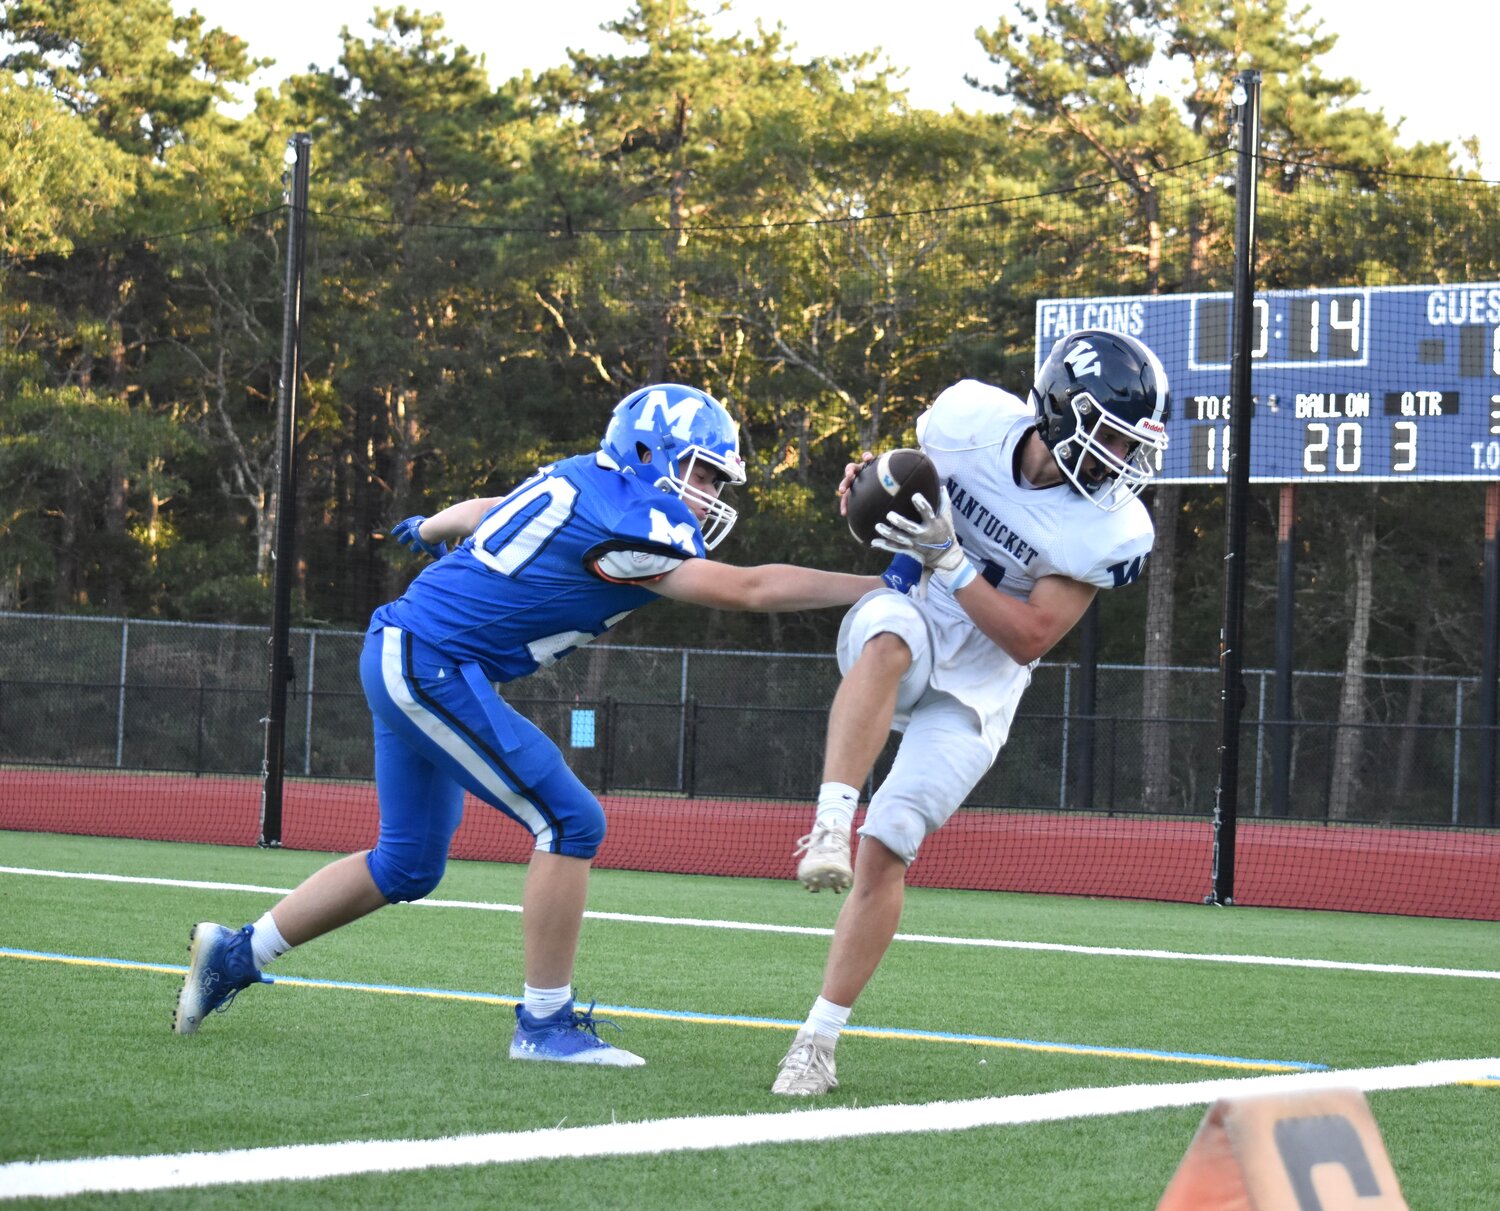 Arann Hanlon catches a touchdown pass on the final play of the Whalers' 34-7 loss Thursday at Mashpee.